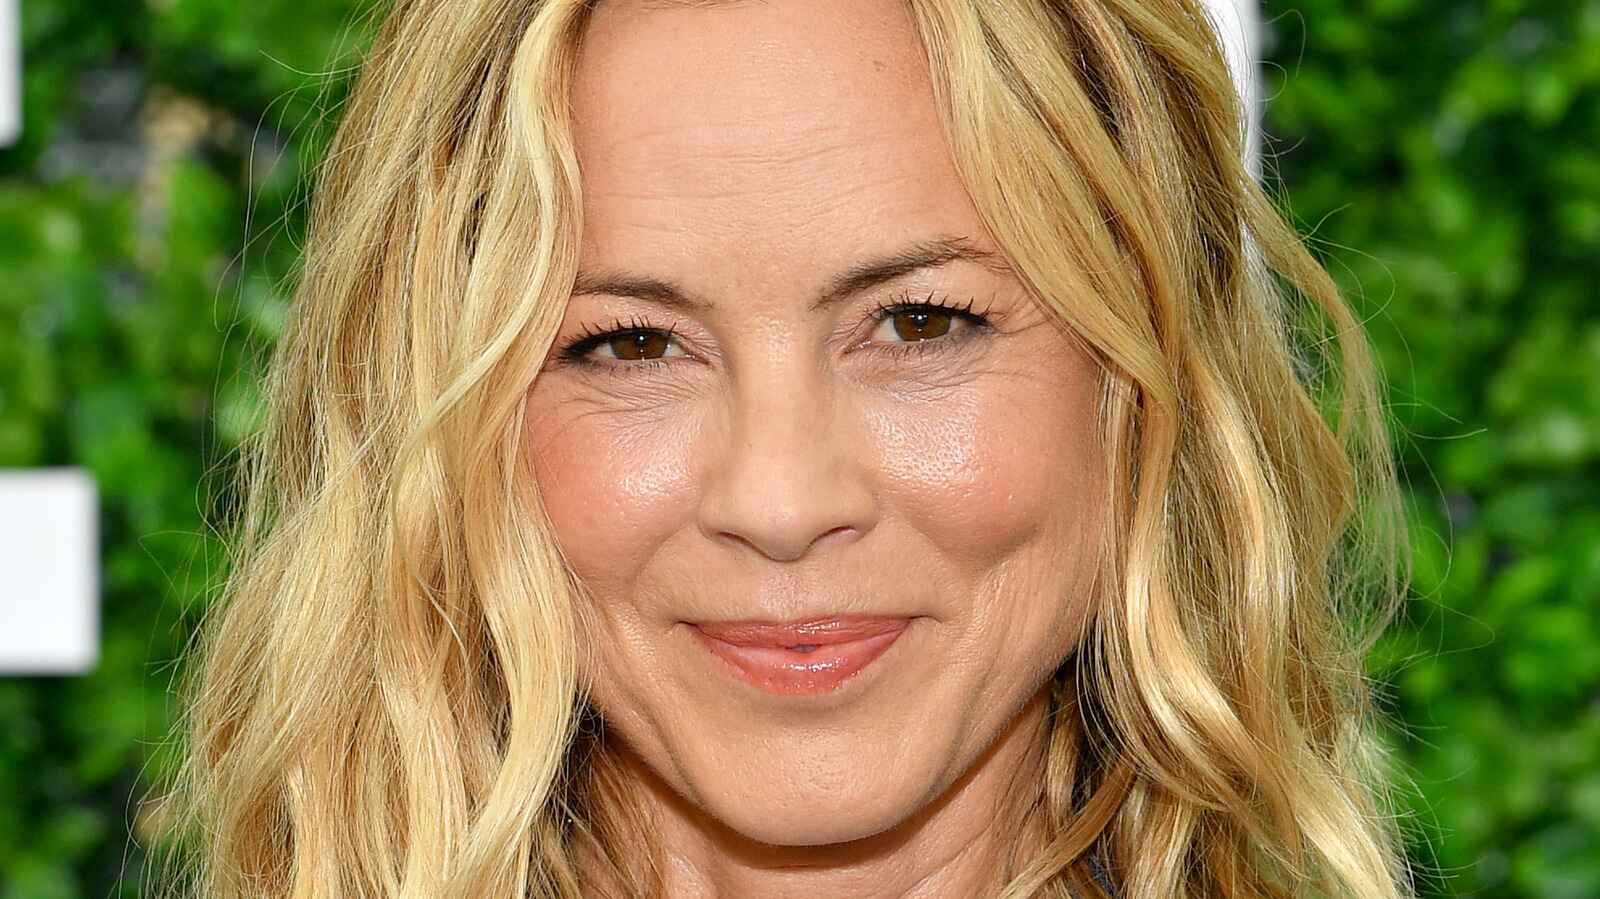 The Transformation Of Maria Bello: From “Coyote Ugly” To Now